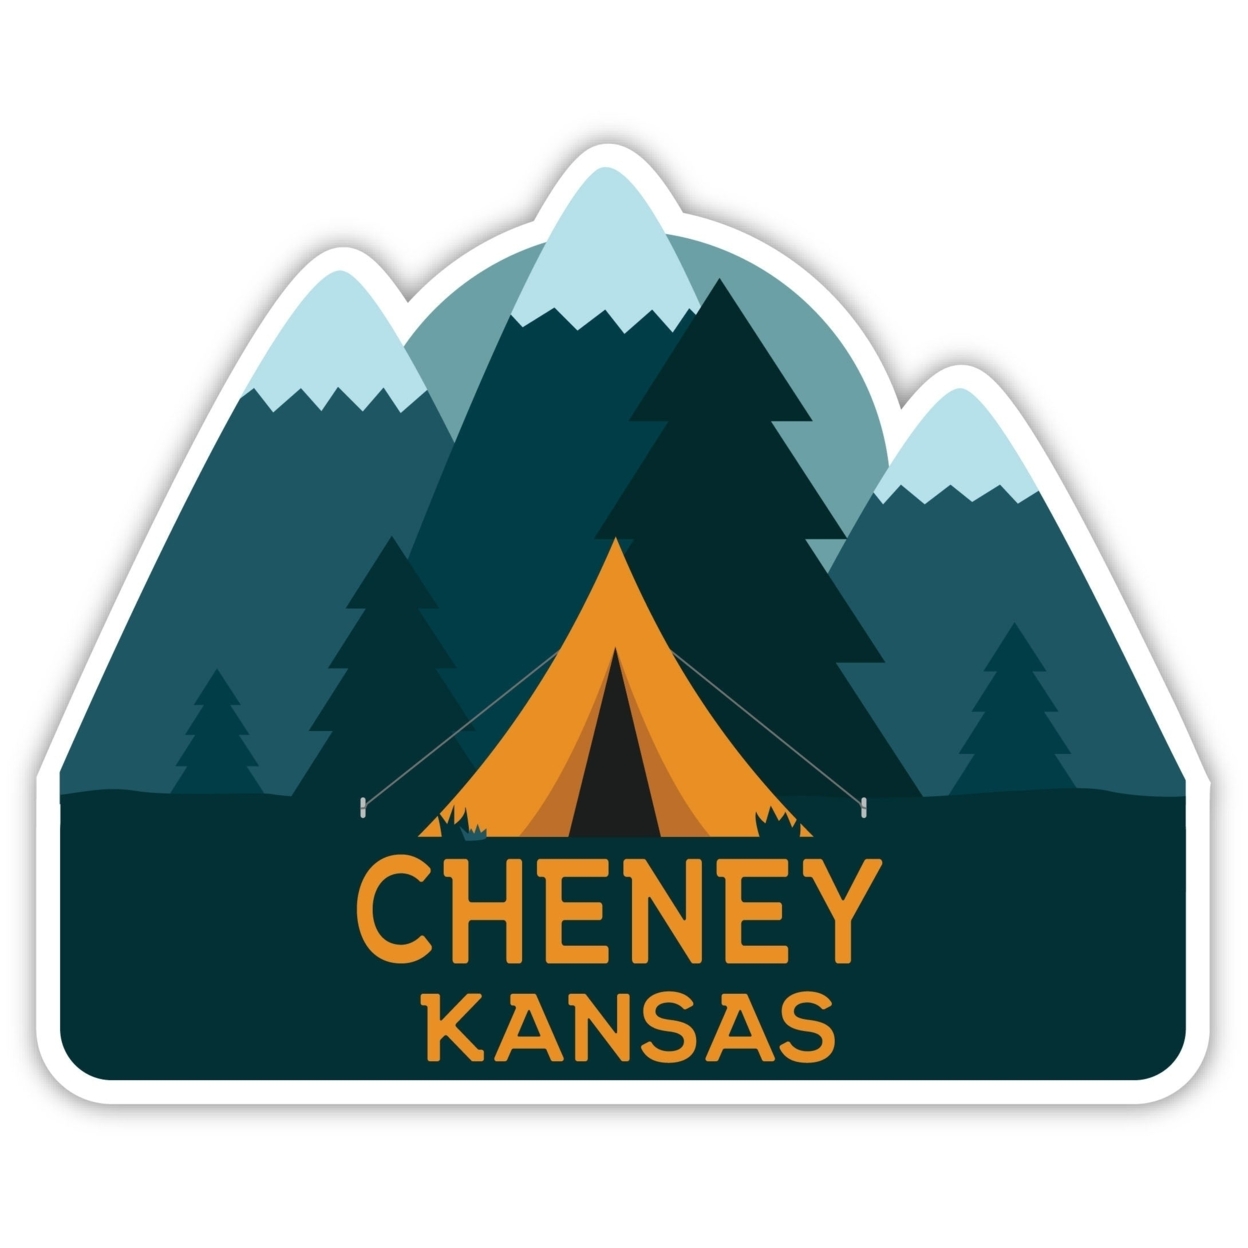 Cheney Kansas Souvenir Decorative Stickers (Choose Theme And Size) - 4-Pack, 6-Inch, Tent